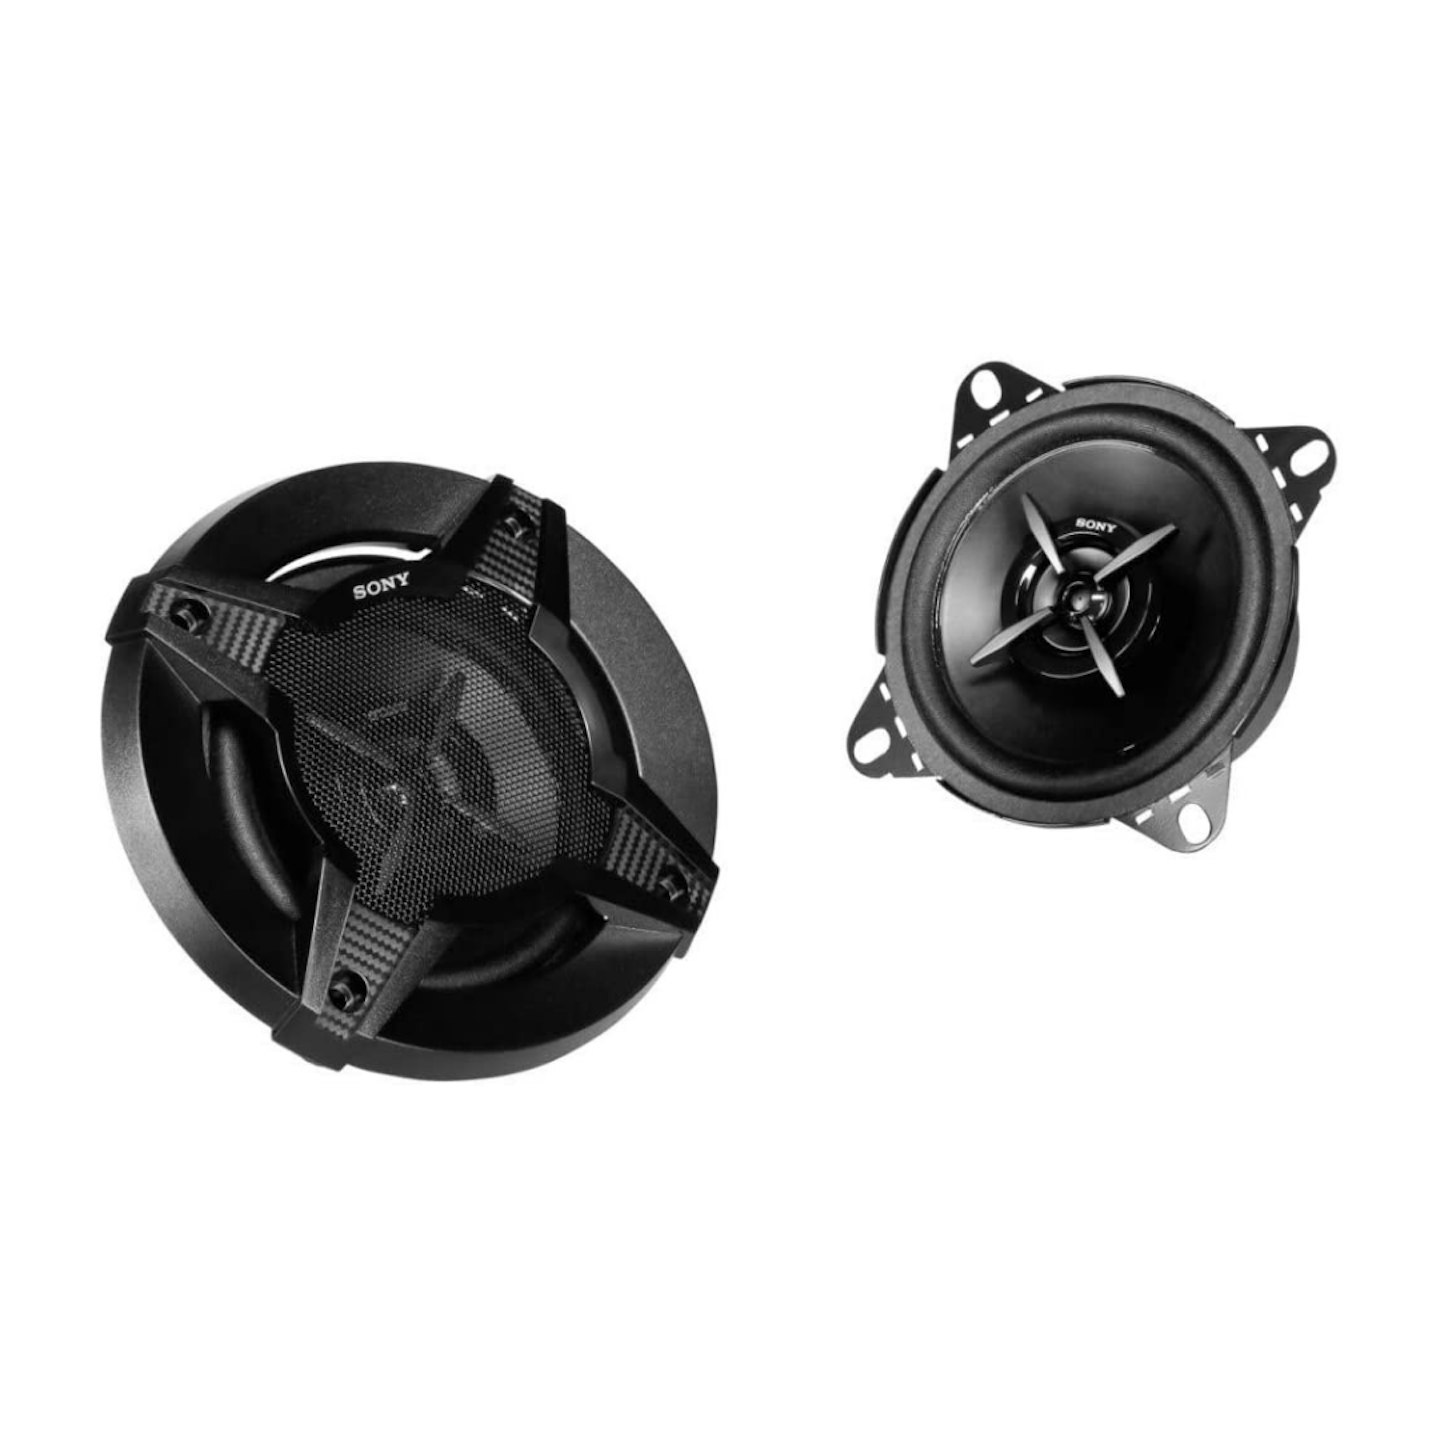 Sony XSFB1020 Coaxial speakers